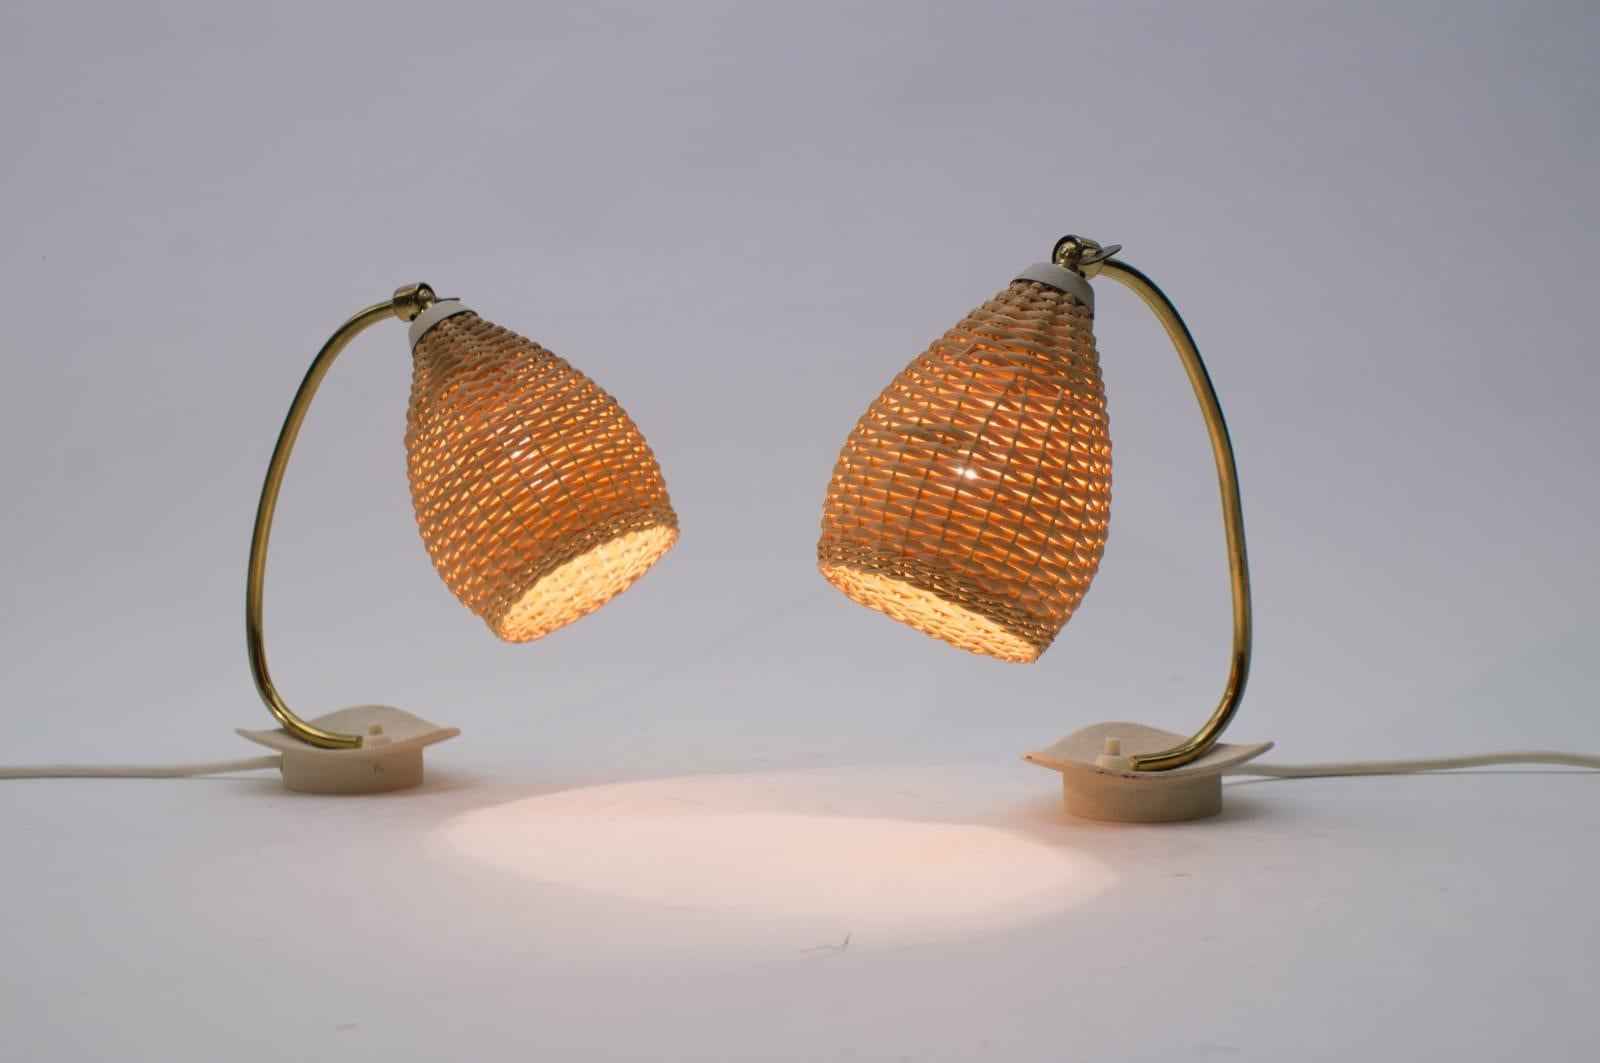 Austrian Pair of Lovely Brass and Wicker Table Lamps from the 1950s, Austria For Sale